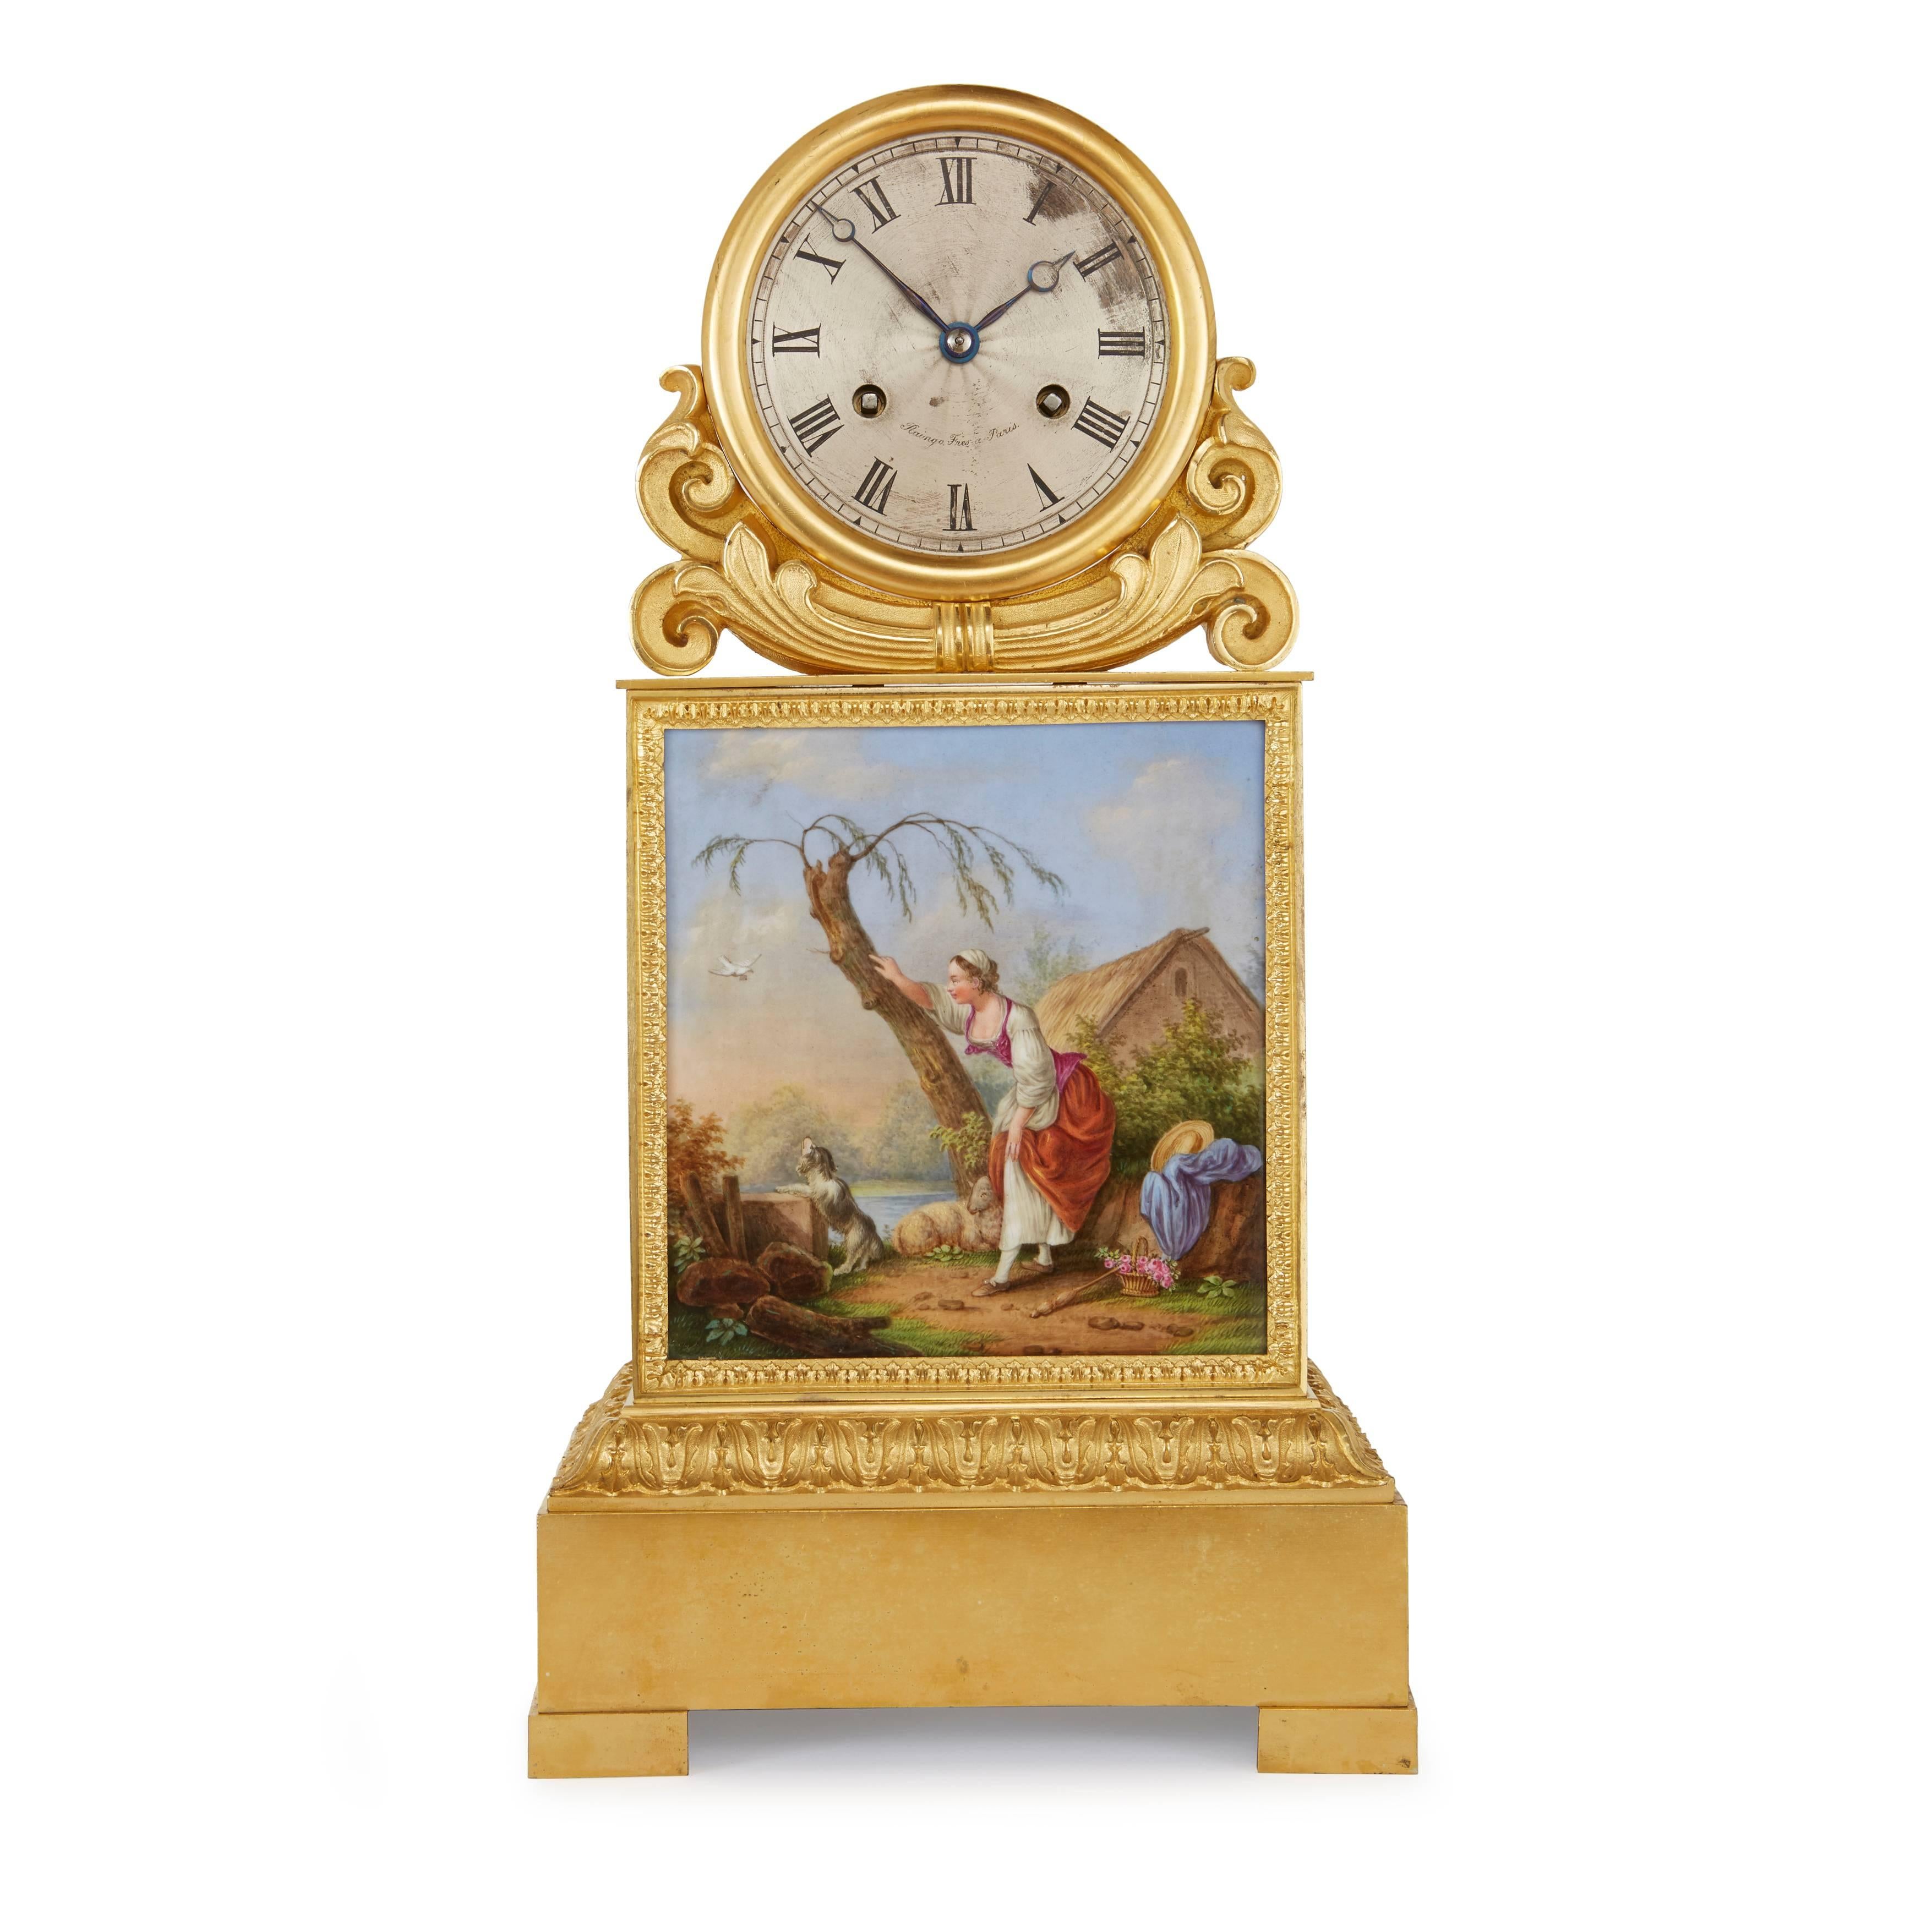 The rectangular case inset with a finely painted plaque depicting a shepherdess in a rural landscape, the silvered dial signed Raingo Frères a Paris, similarly signed bell striking Pons movement silk suspension and outside count wheel, the reverse